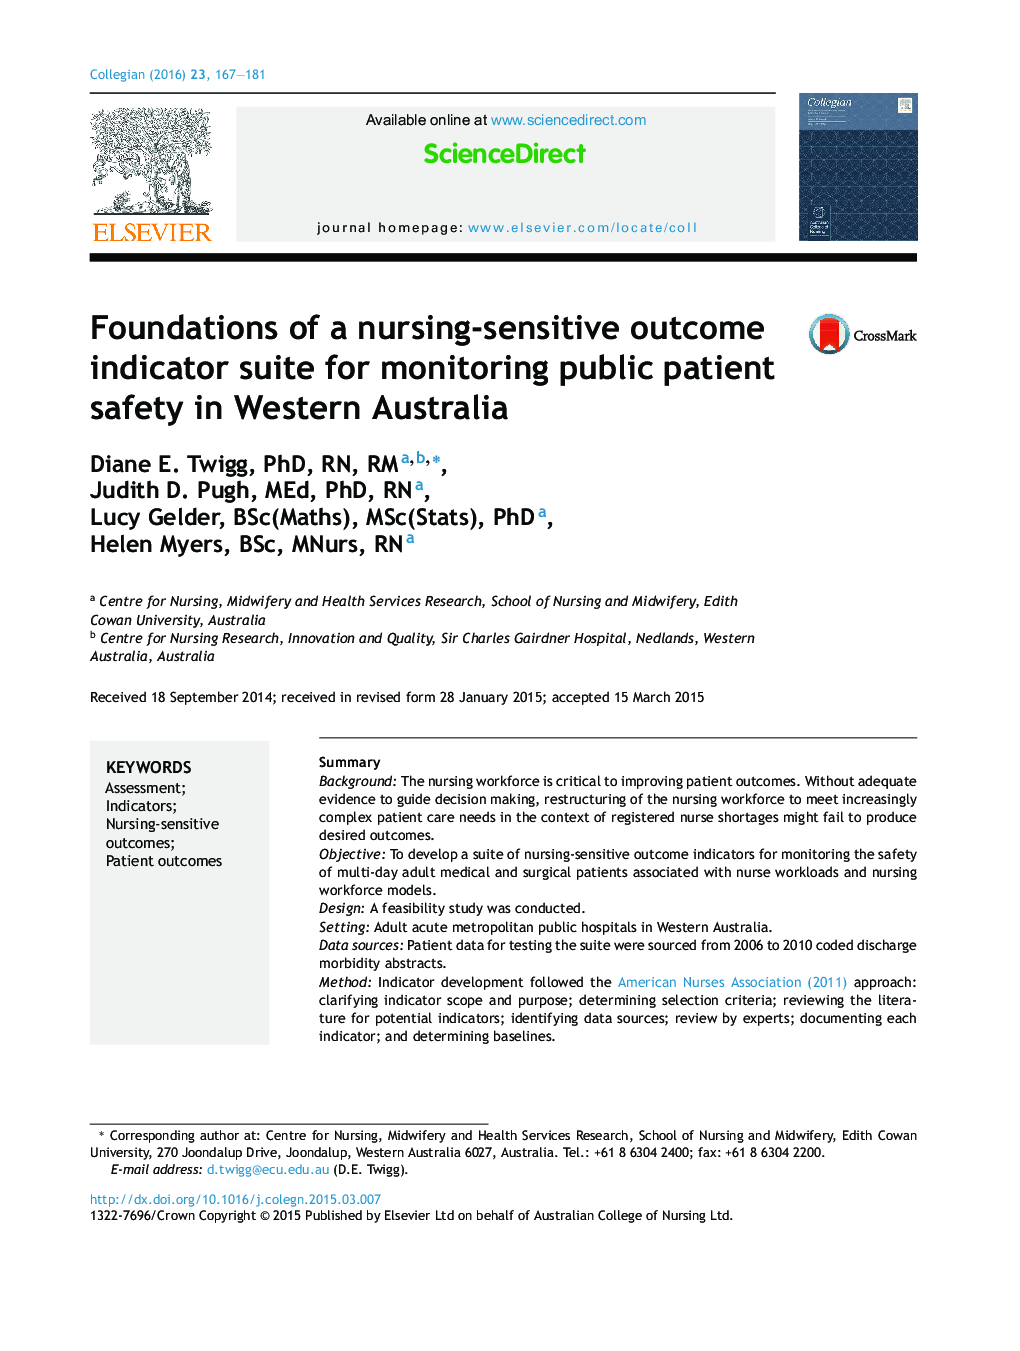 Foundations of a nursing-sensitive outcome indicator suite for monitoring public patient safety in Western Australia